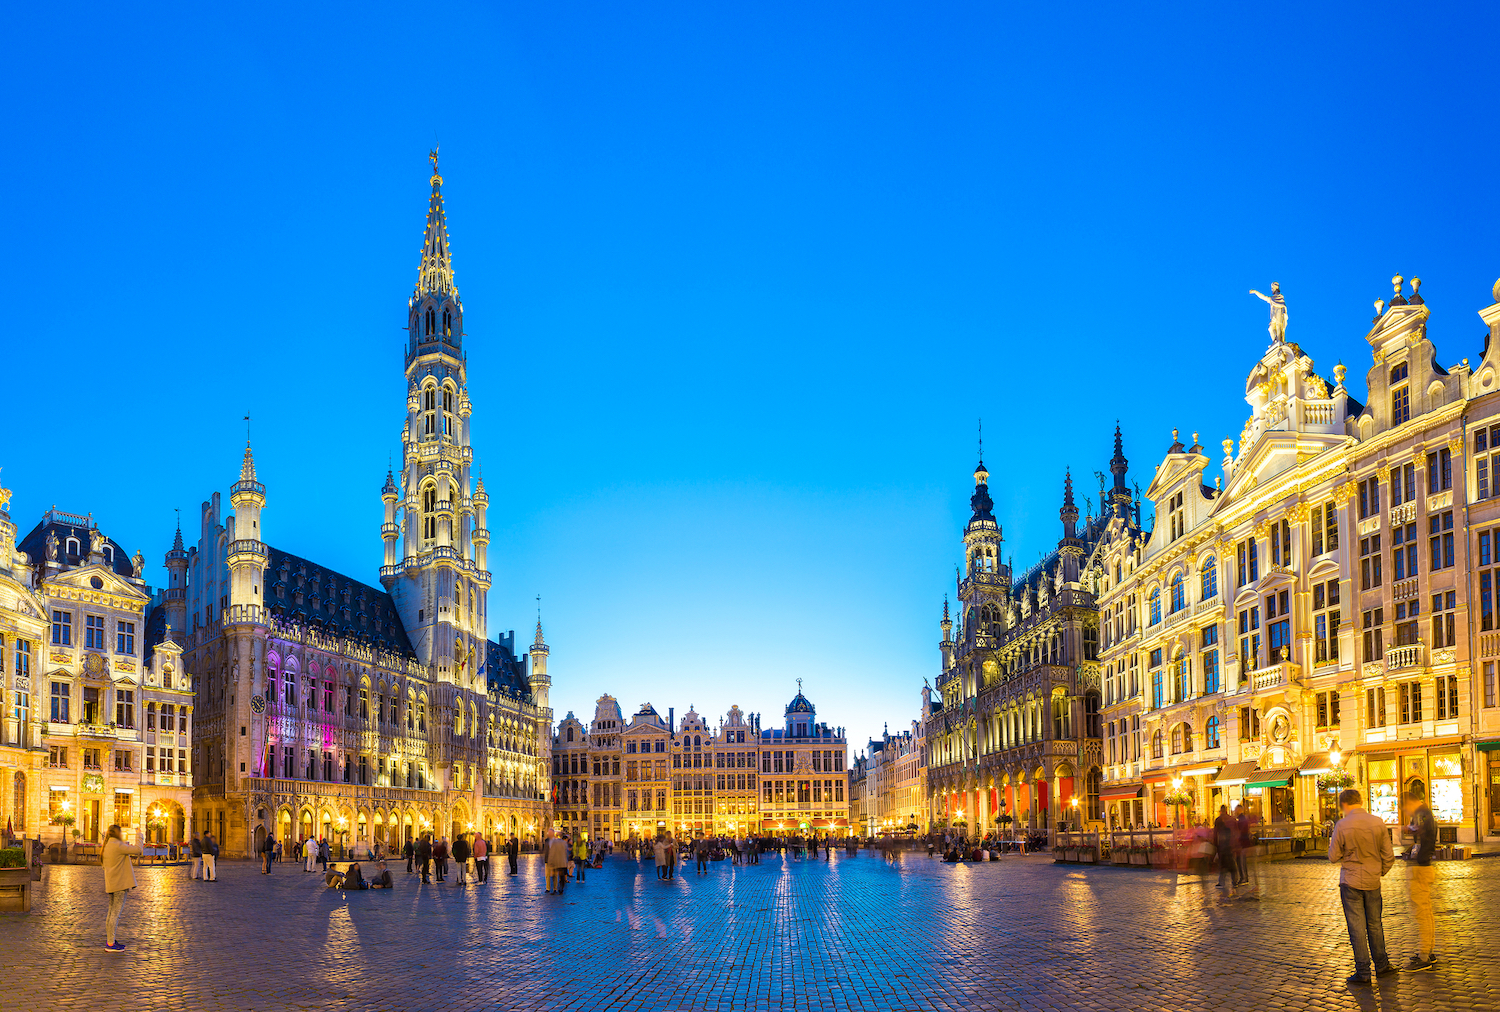 Panorama The Grand Place in Brussels in a beautiful summer night, Belgium